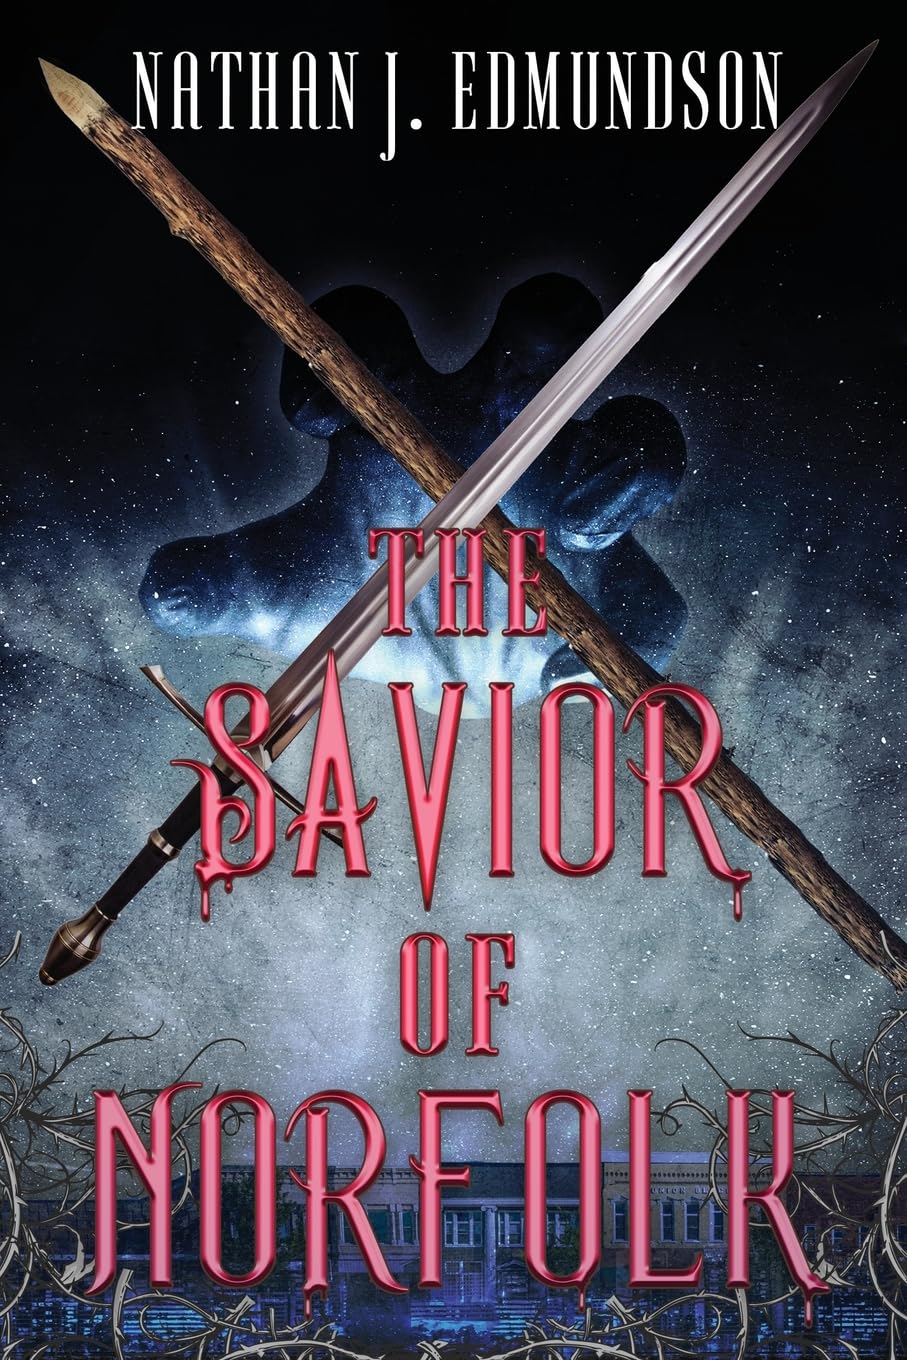 New novel "The Savior of Norfolk" by Nathan J. Edmundson is released, a thrilling YA Christian fantasy novel about a young hero navigating parallel worlds and finding purpose in suffering